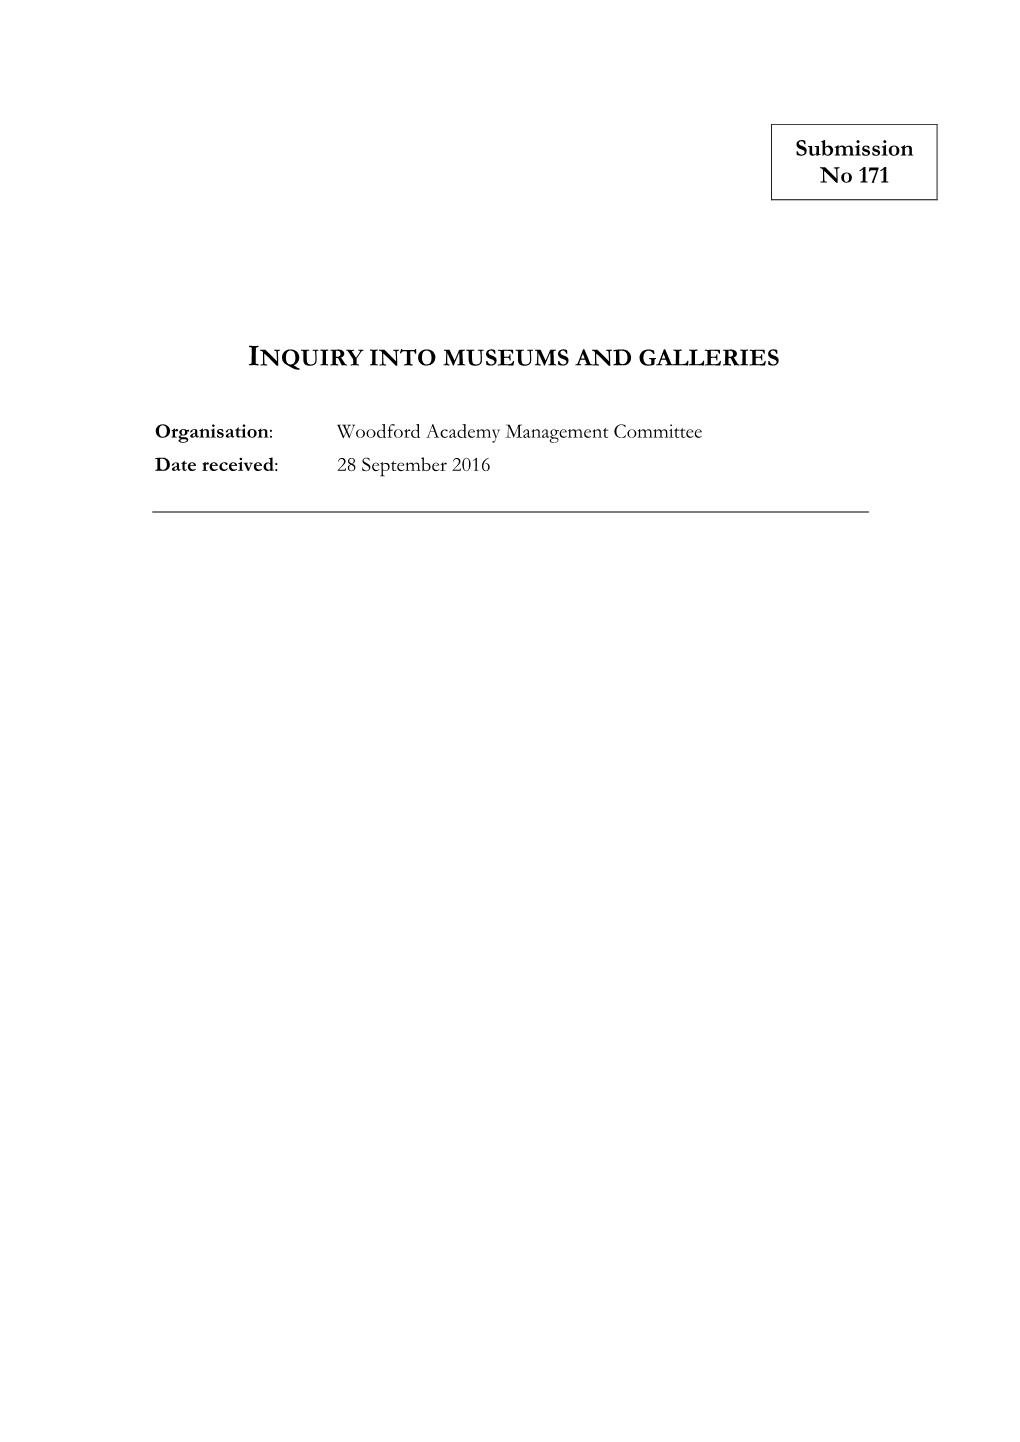 Submission No 171 INQUIRY INTO MUSEUMS and GALLERIES